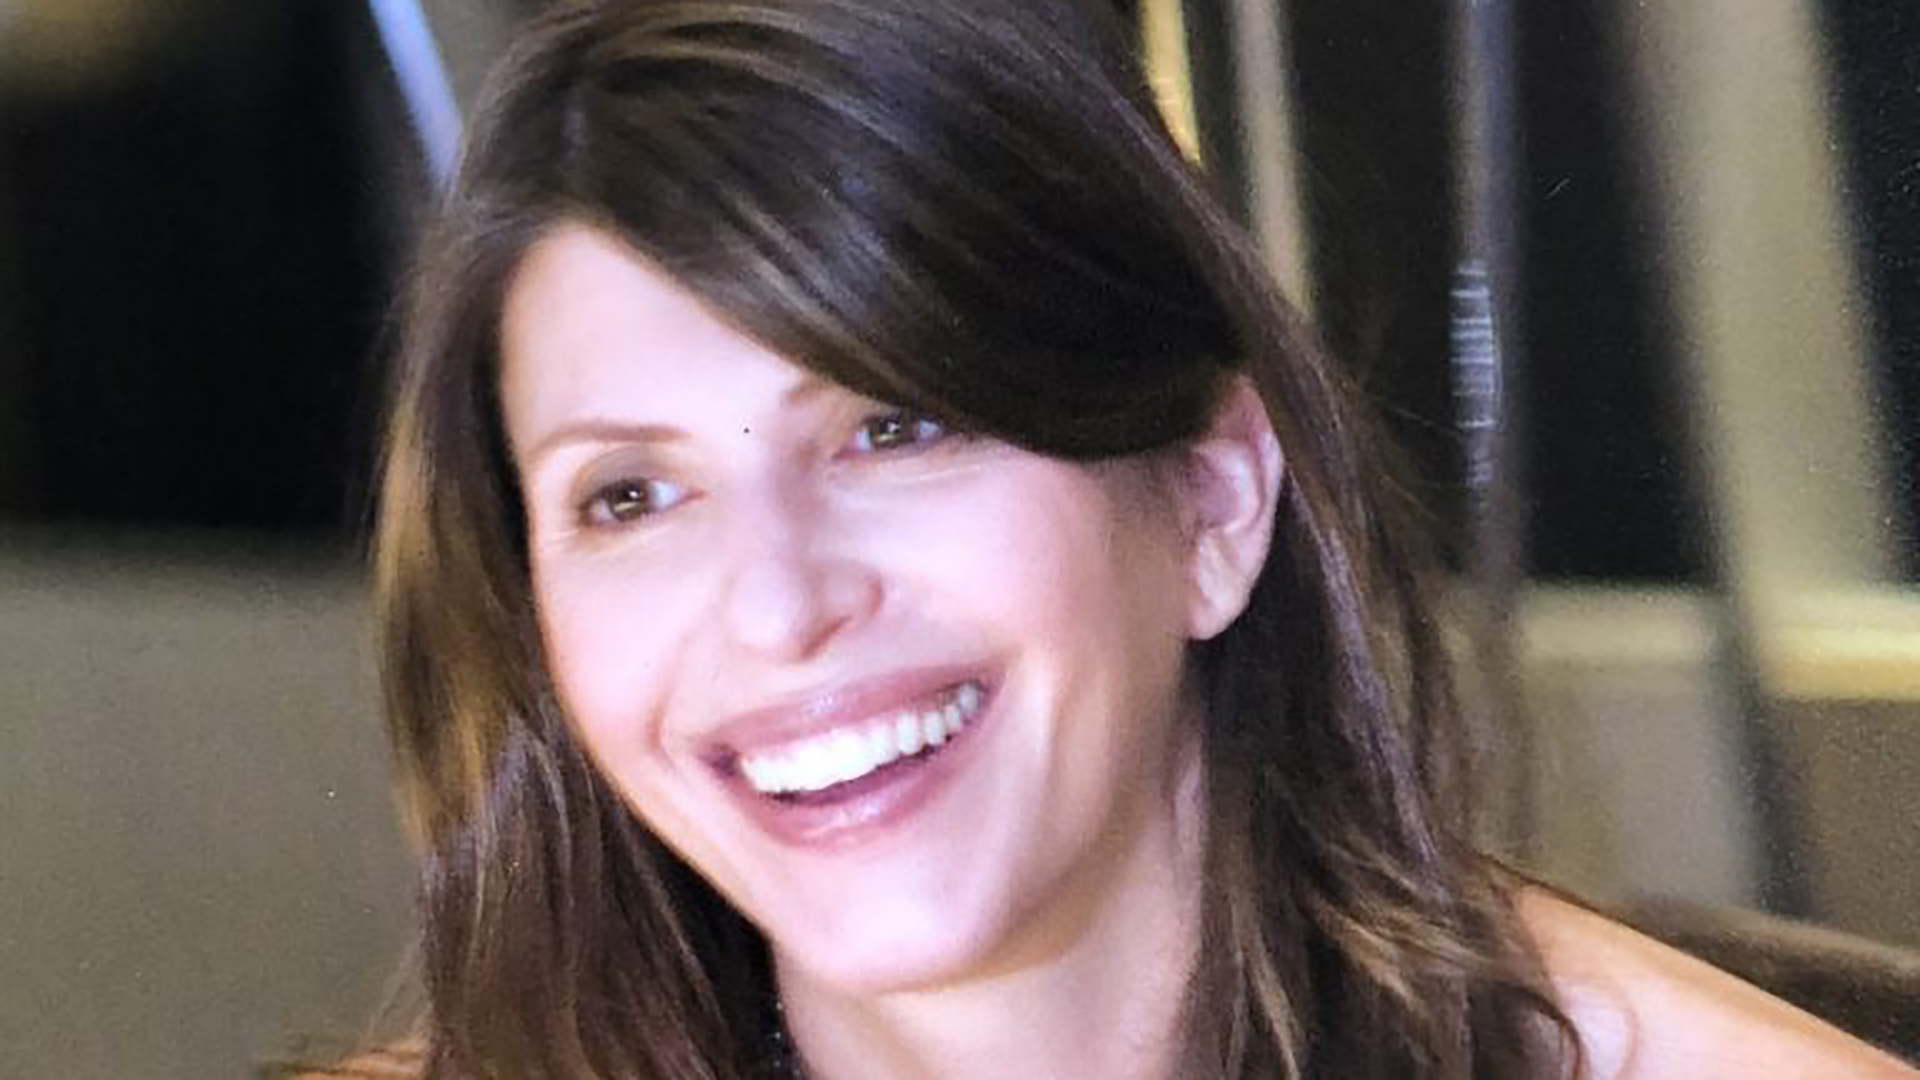 What Happened to Missing Connecticut Mother Jennifer Dulos?